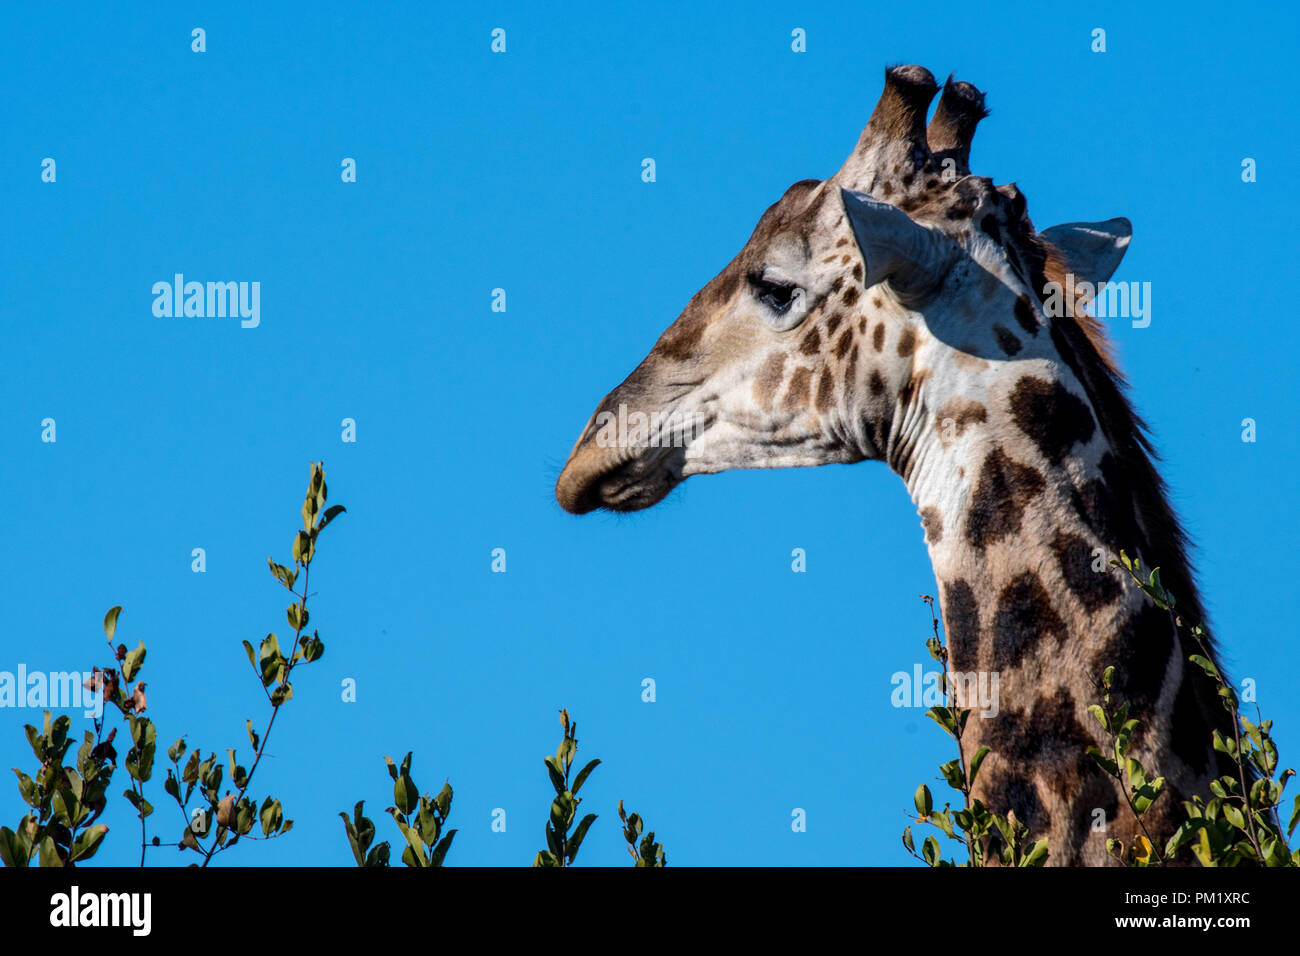 A close up of a giraffe with blue skies, trees and branches in the background. The image was taken in the kruger national park. Stock Photo